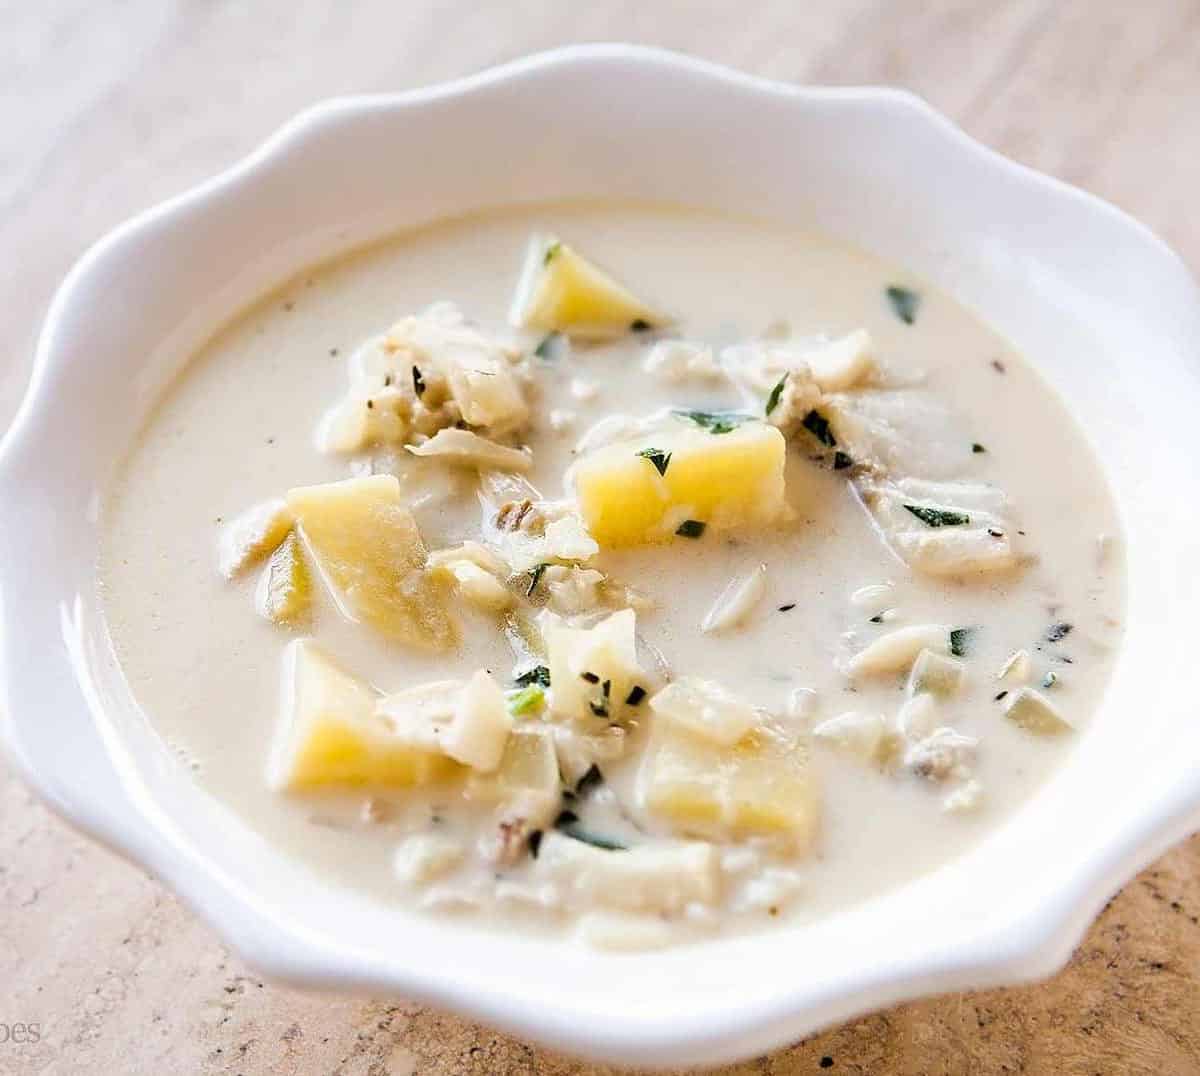 Warm up with this Hearty and Delicious Walleye Chowder!